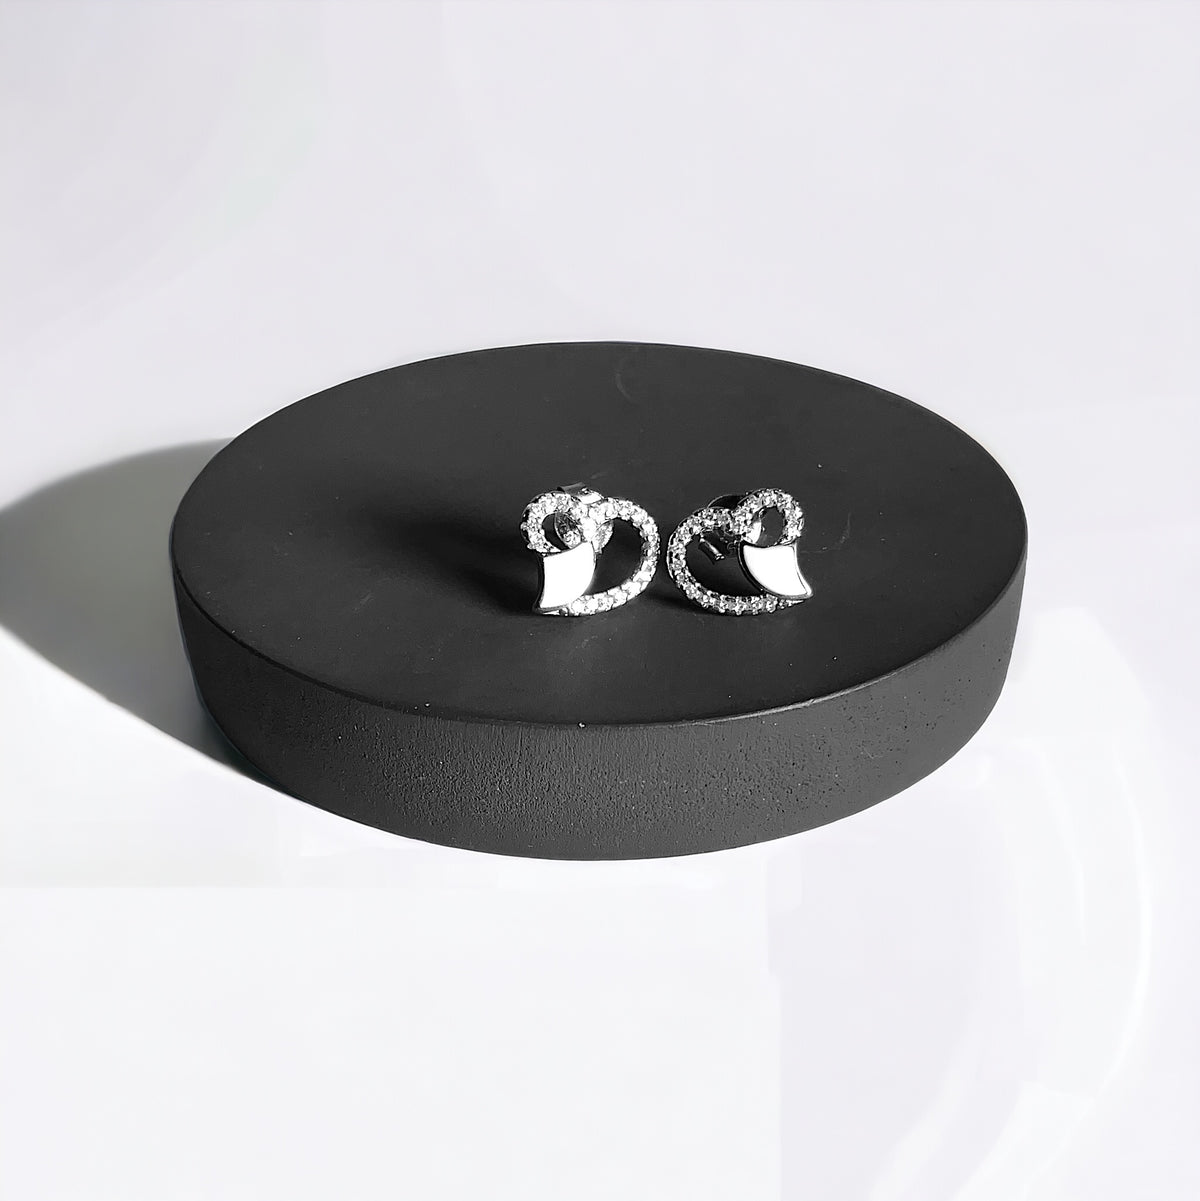 a pair of earrings sitting on top of a black box